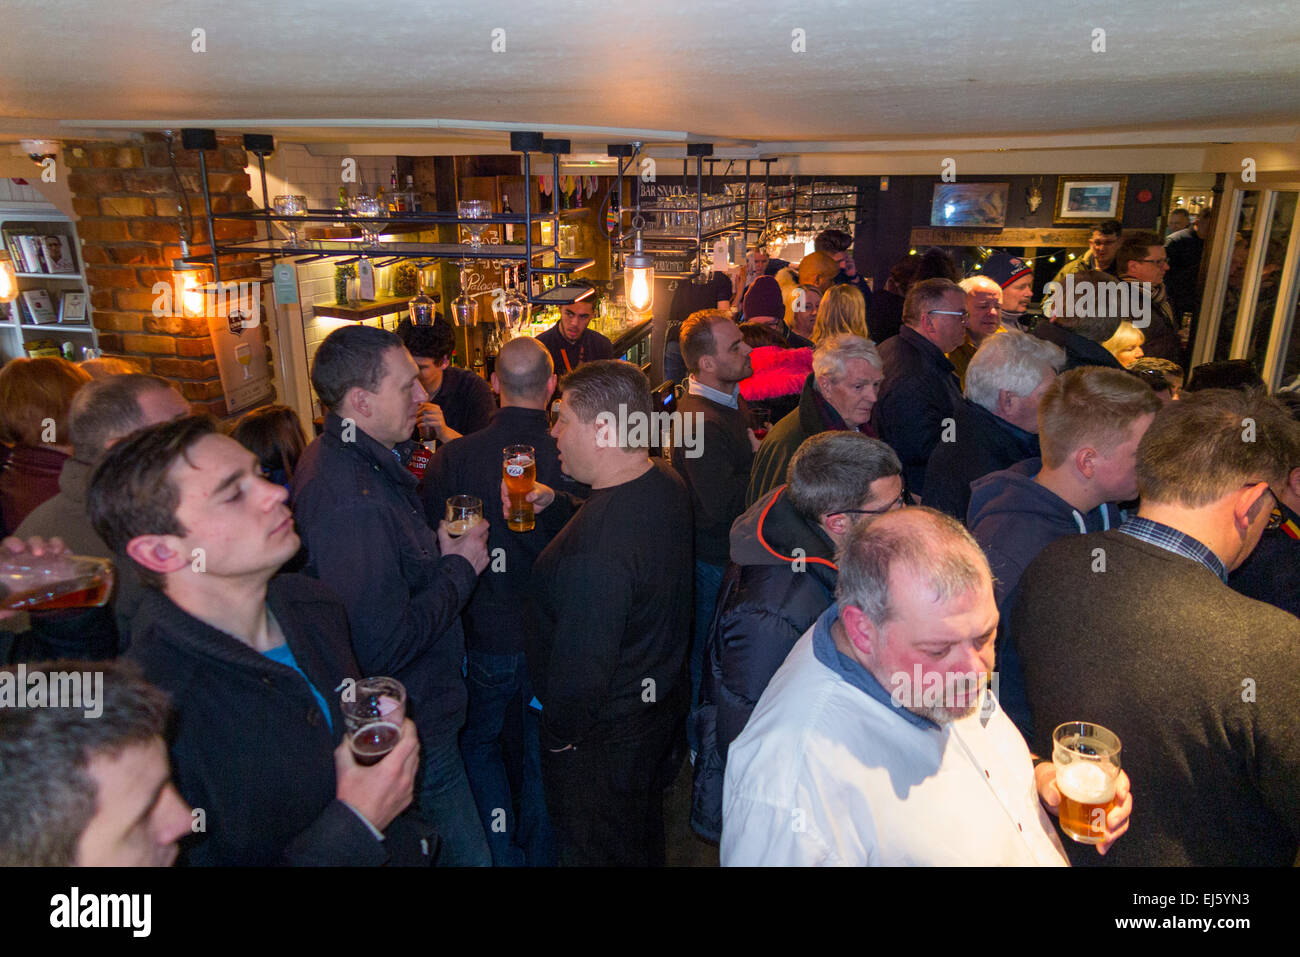 Rugby fan fans enjoy drinking / watching TV at the busy Prince Blucher pub / public house Twickenham. UK: popular on match days Stock Photo